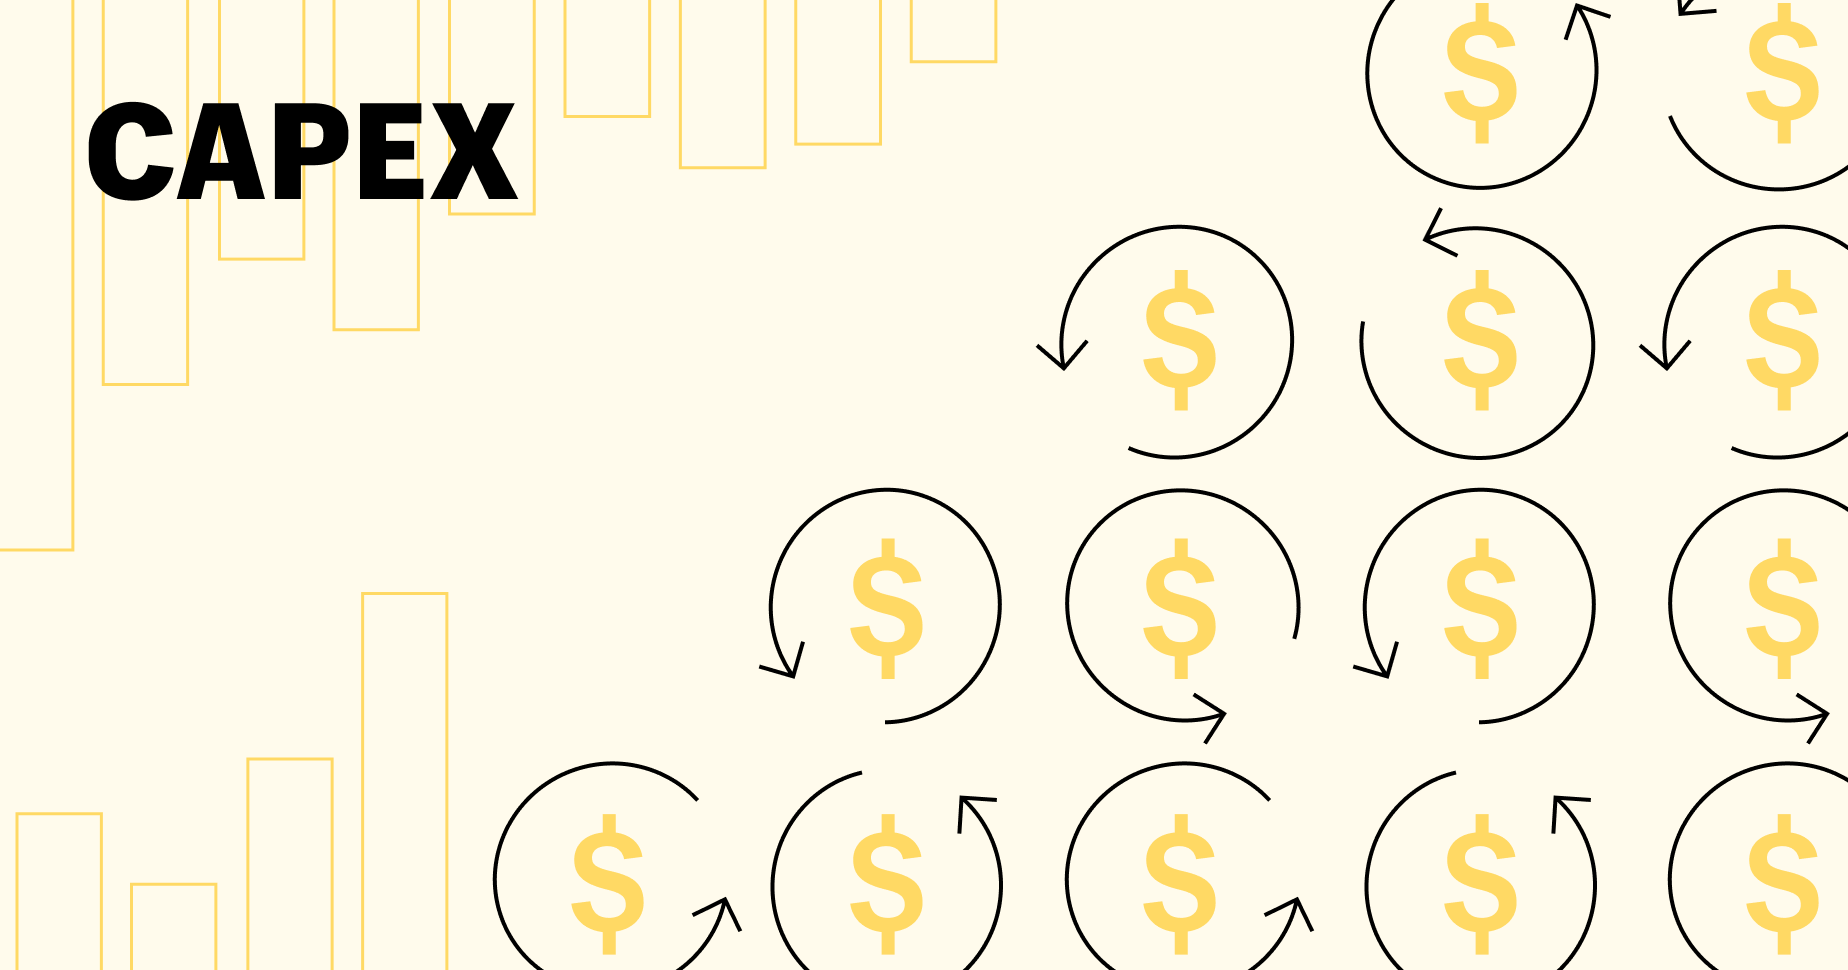 Featured image including "CapEx" on a yellow background with dollar symbols. 